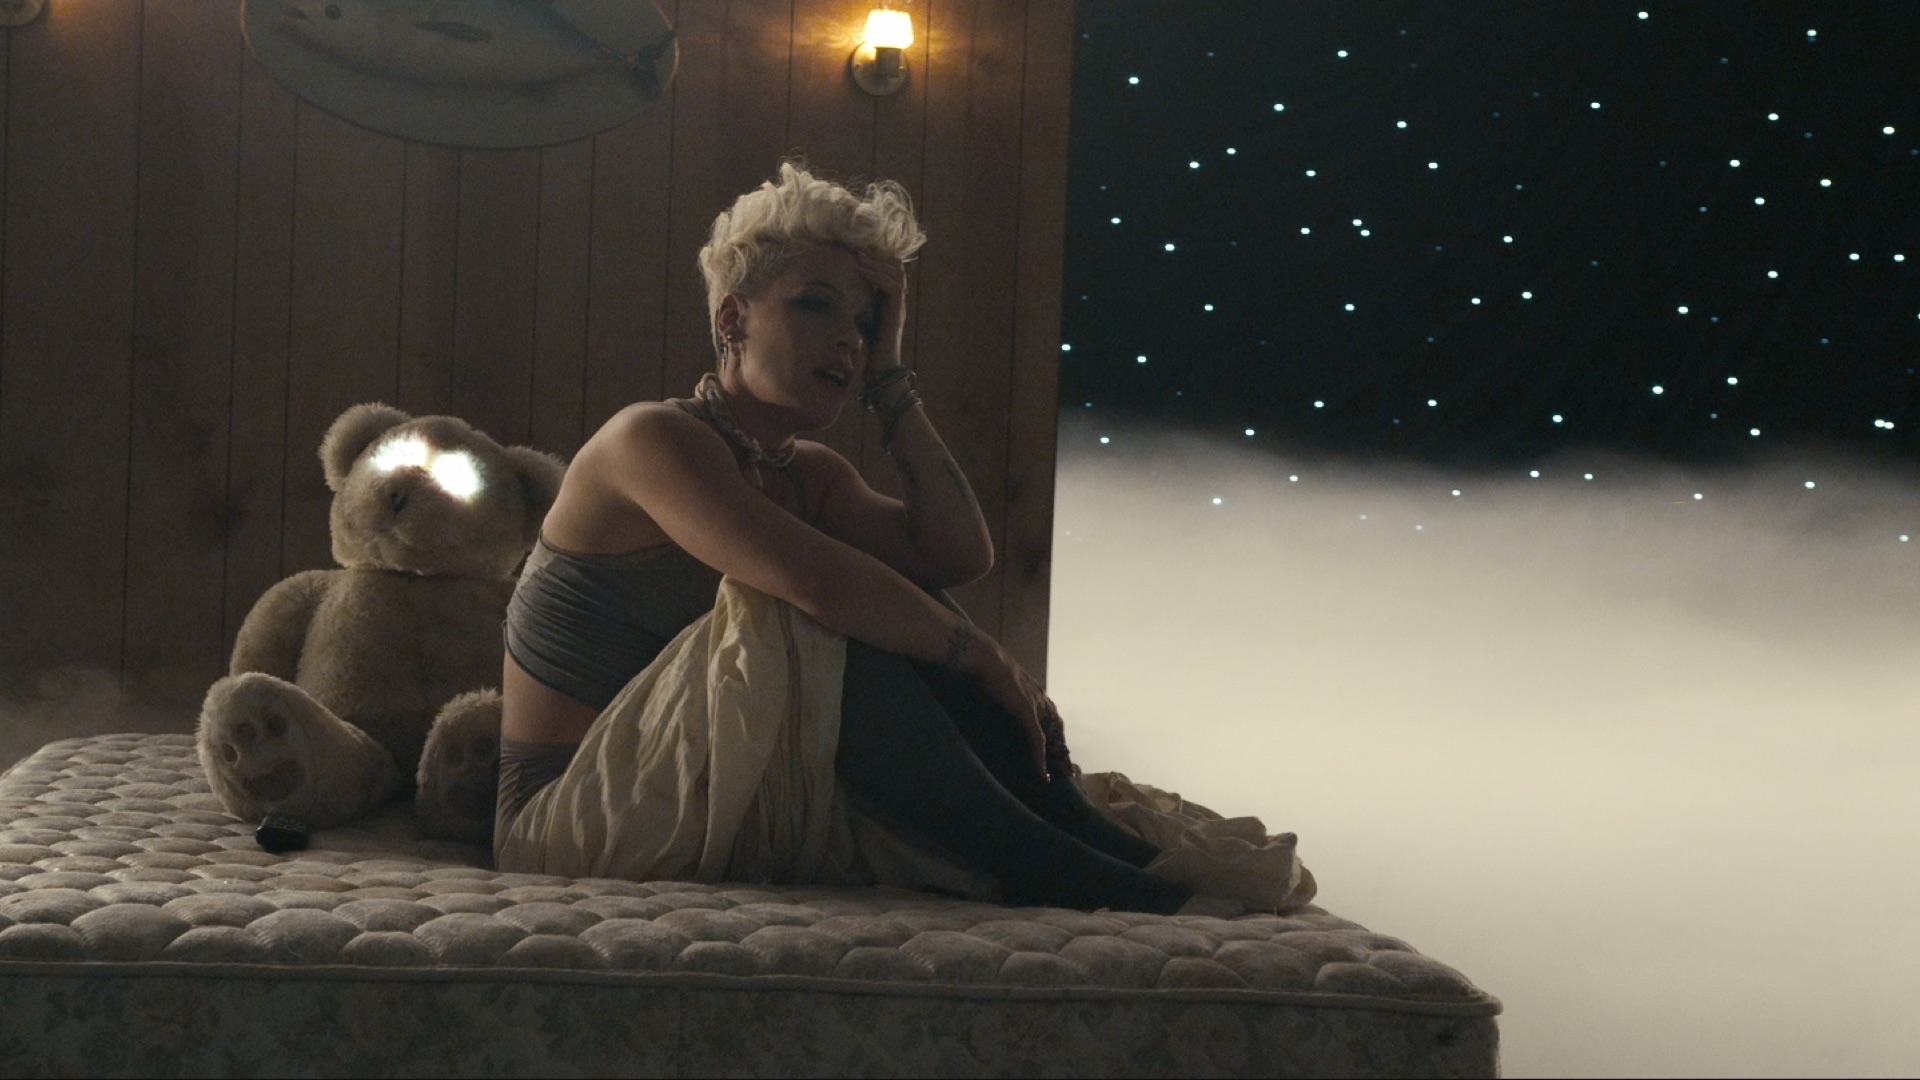 Just Give Me a Reason (feat. Nate Ruess) - Music Video by P!nk - Apple Music